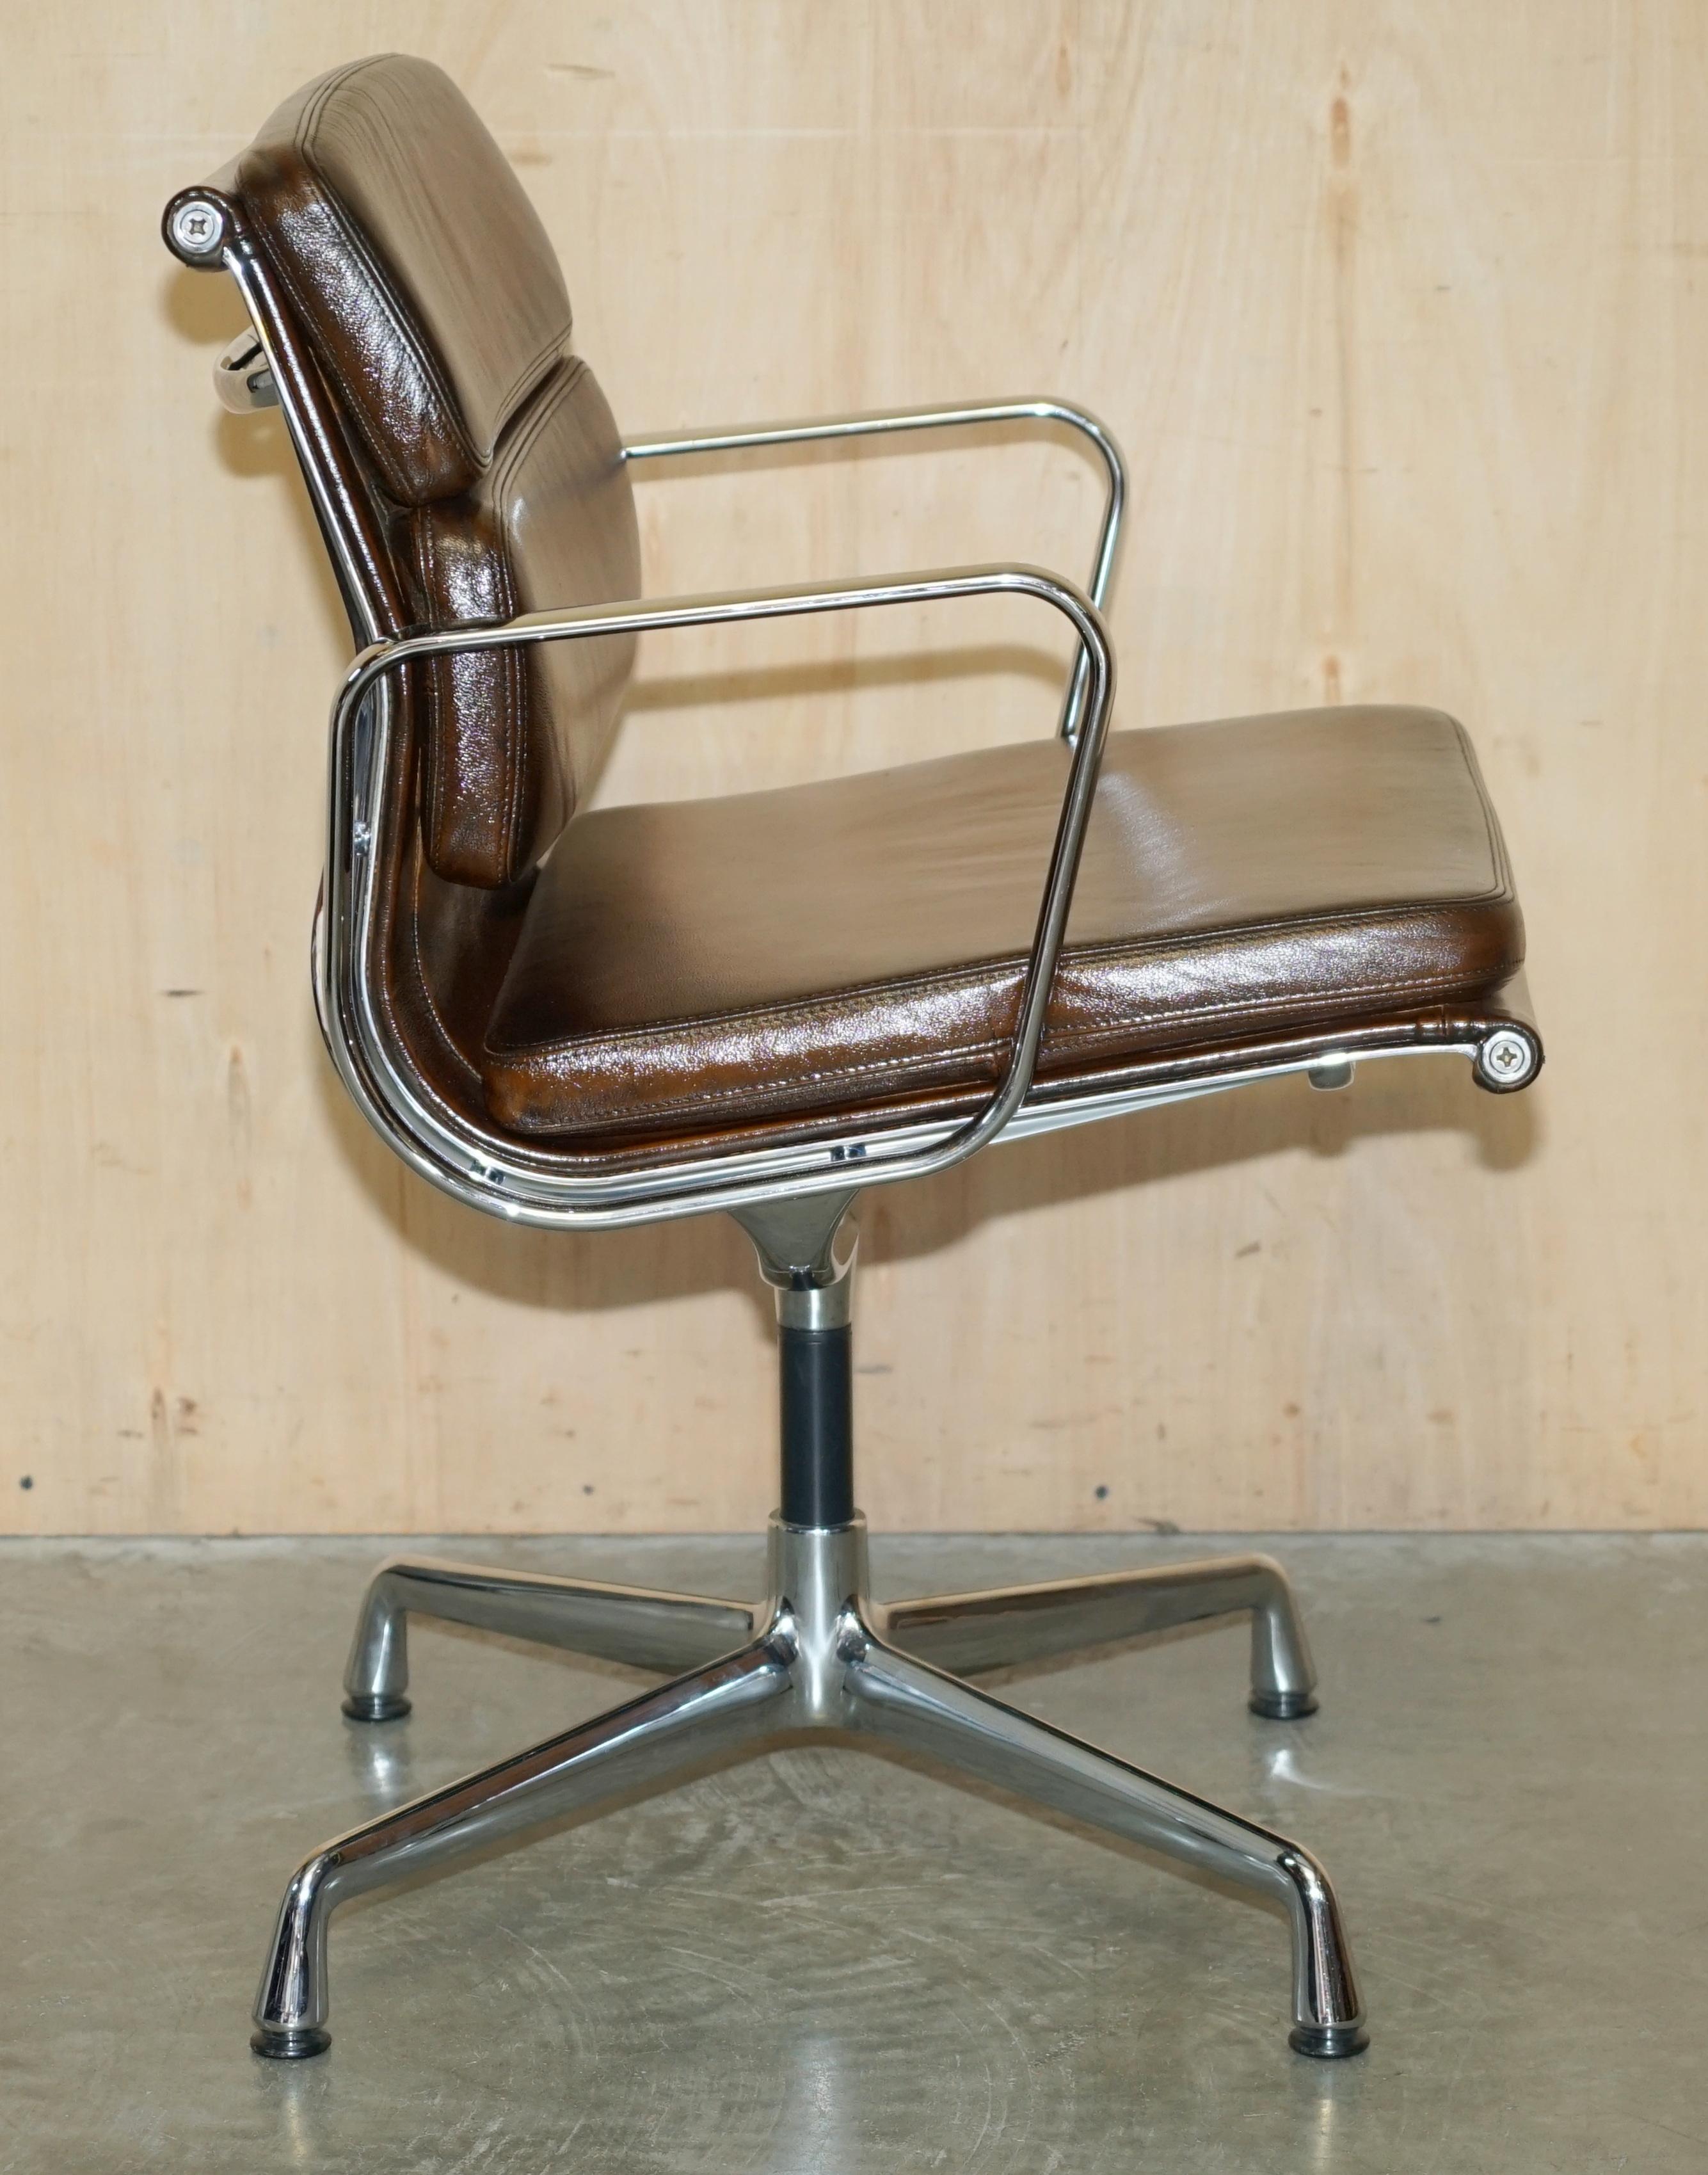 RARE VITRA EAMES EA 208 SOFT PAD SWiVEL BROWN LEATHER OFFICE ARMCHAIR 6